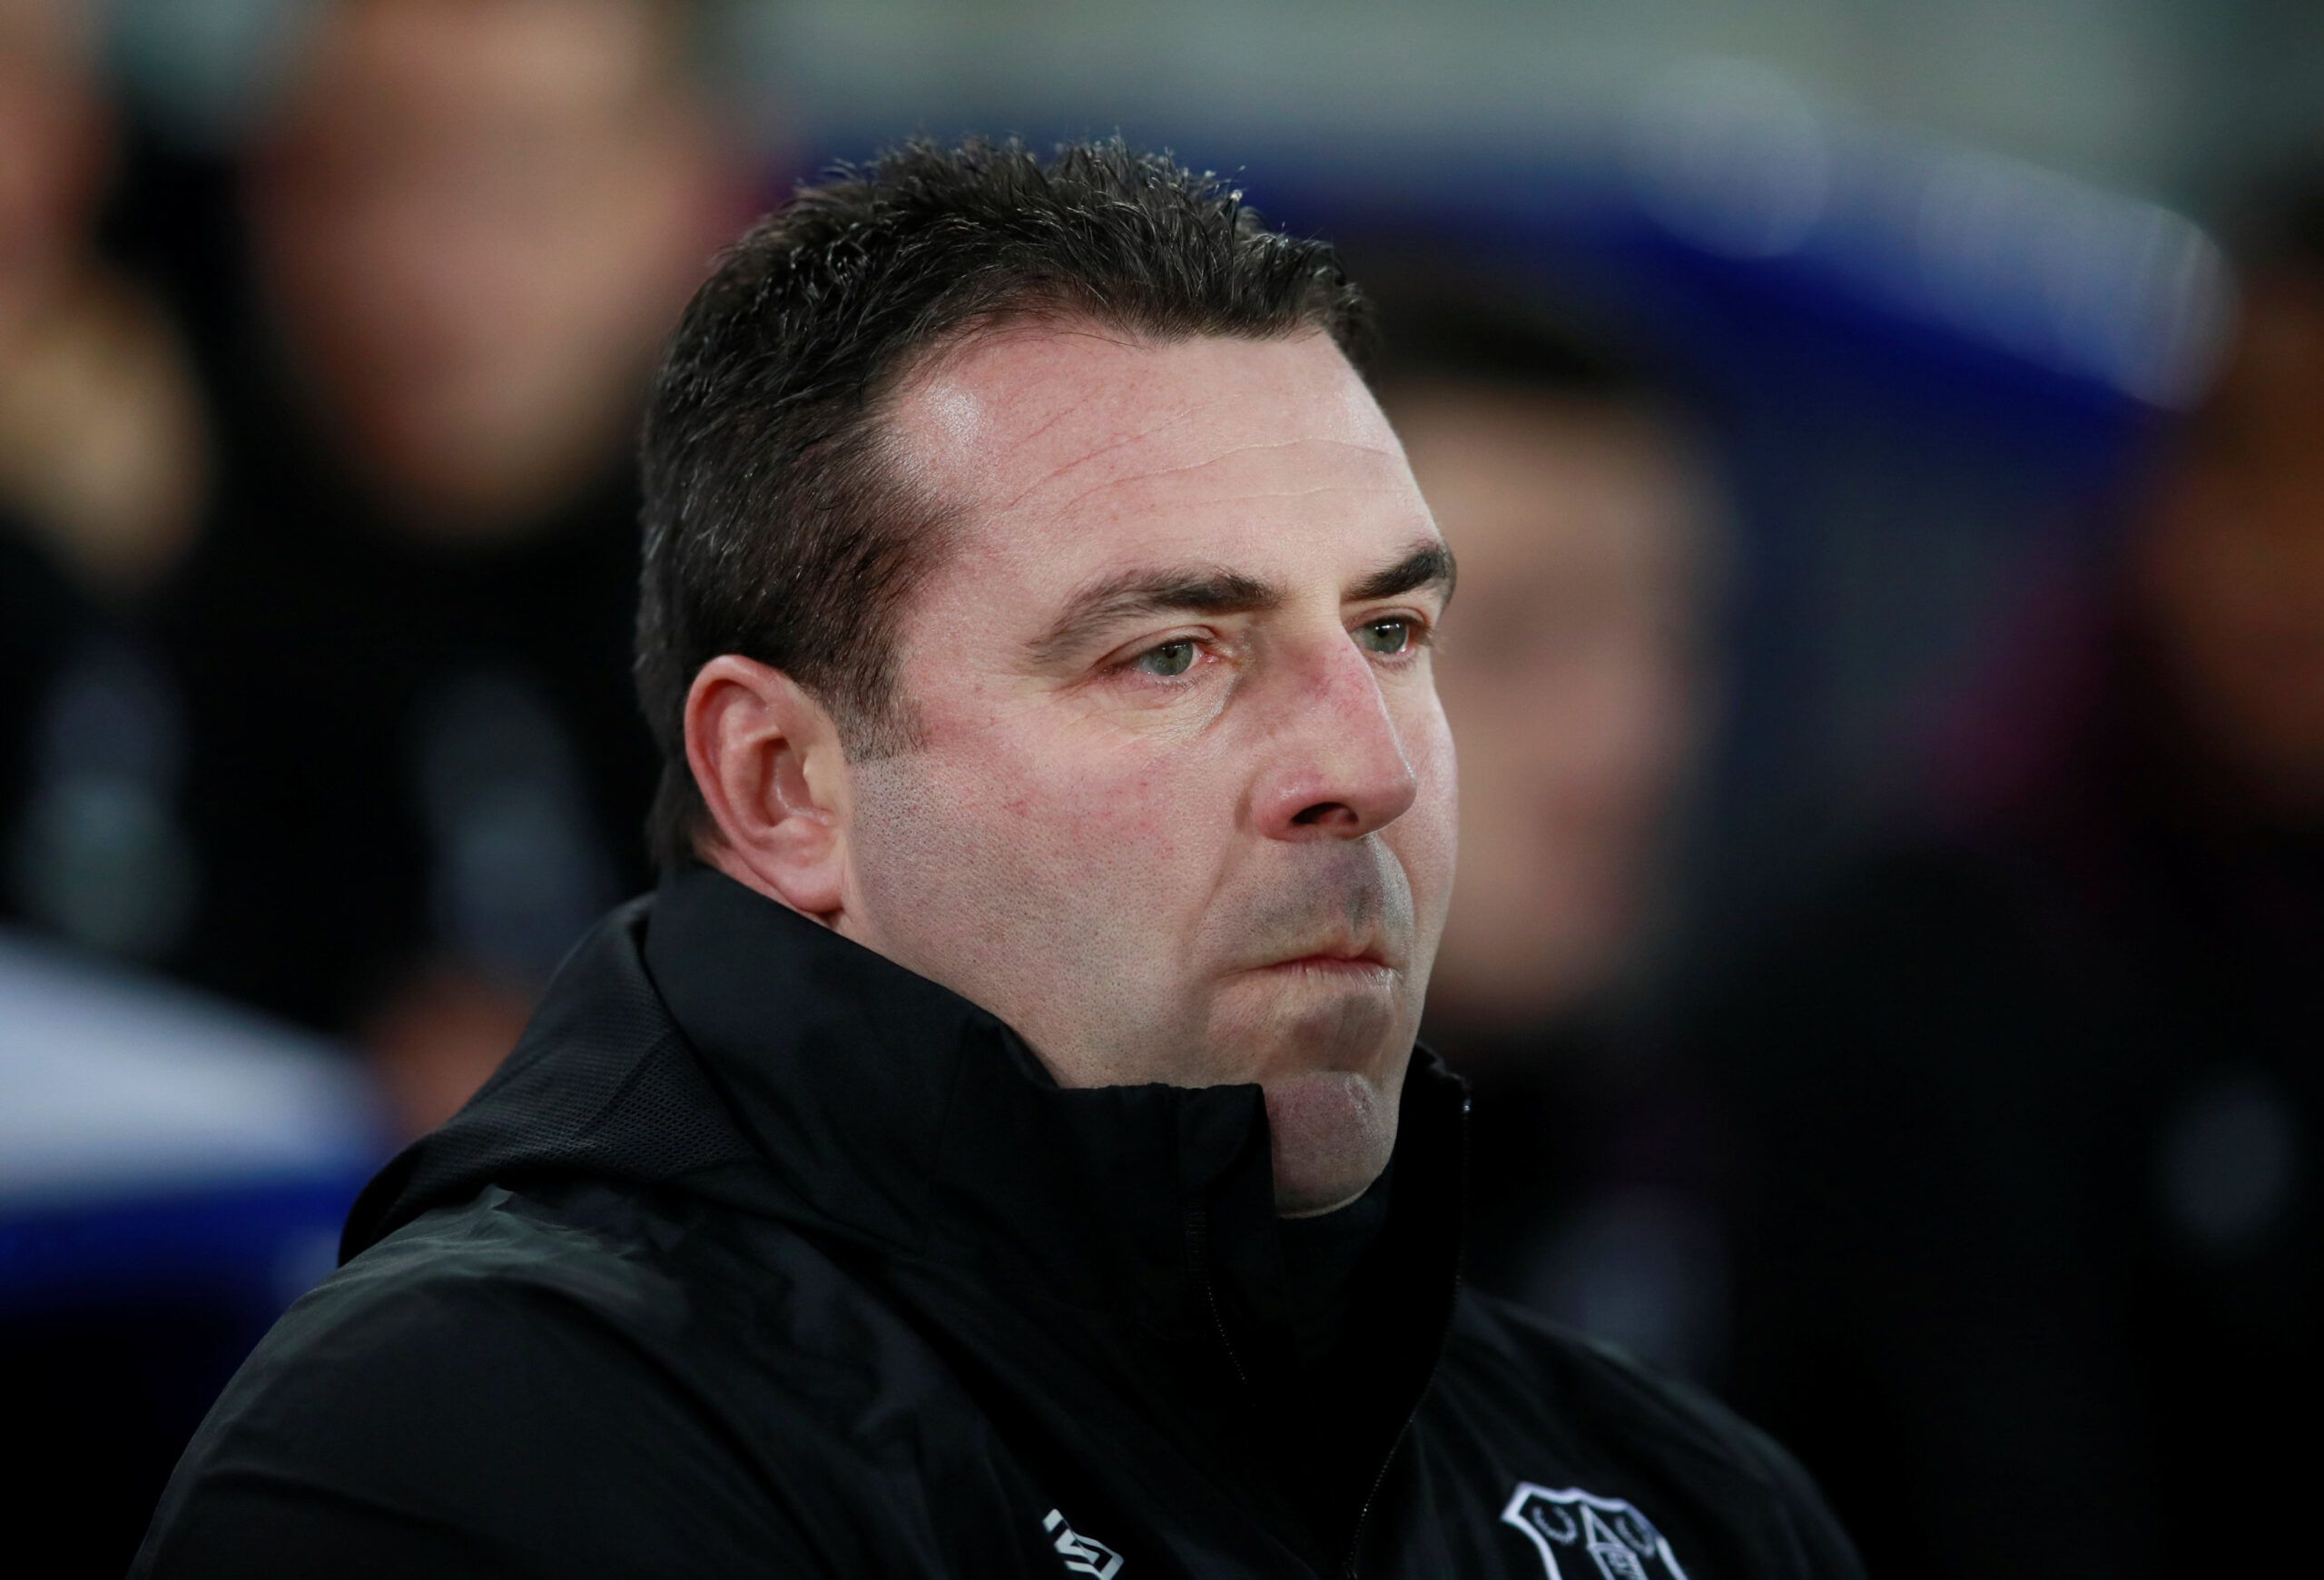 Soccer Football - Premier League - Everton vs West Ham United - Goodison Park, Liverpool, Britain - November 29, 2017   Everton caretaker manager David Unsworth    Action Images via Reuters/Jason Cairnduff    EDITORIAL USE ONLY. No use with unauthorized audio, video, data, fixture lists, club/league logos or 